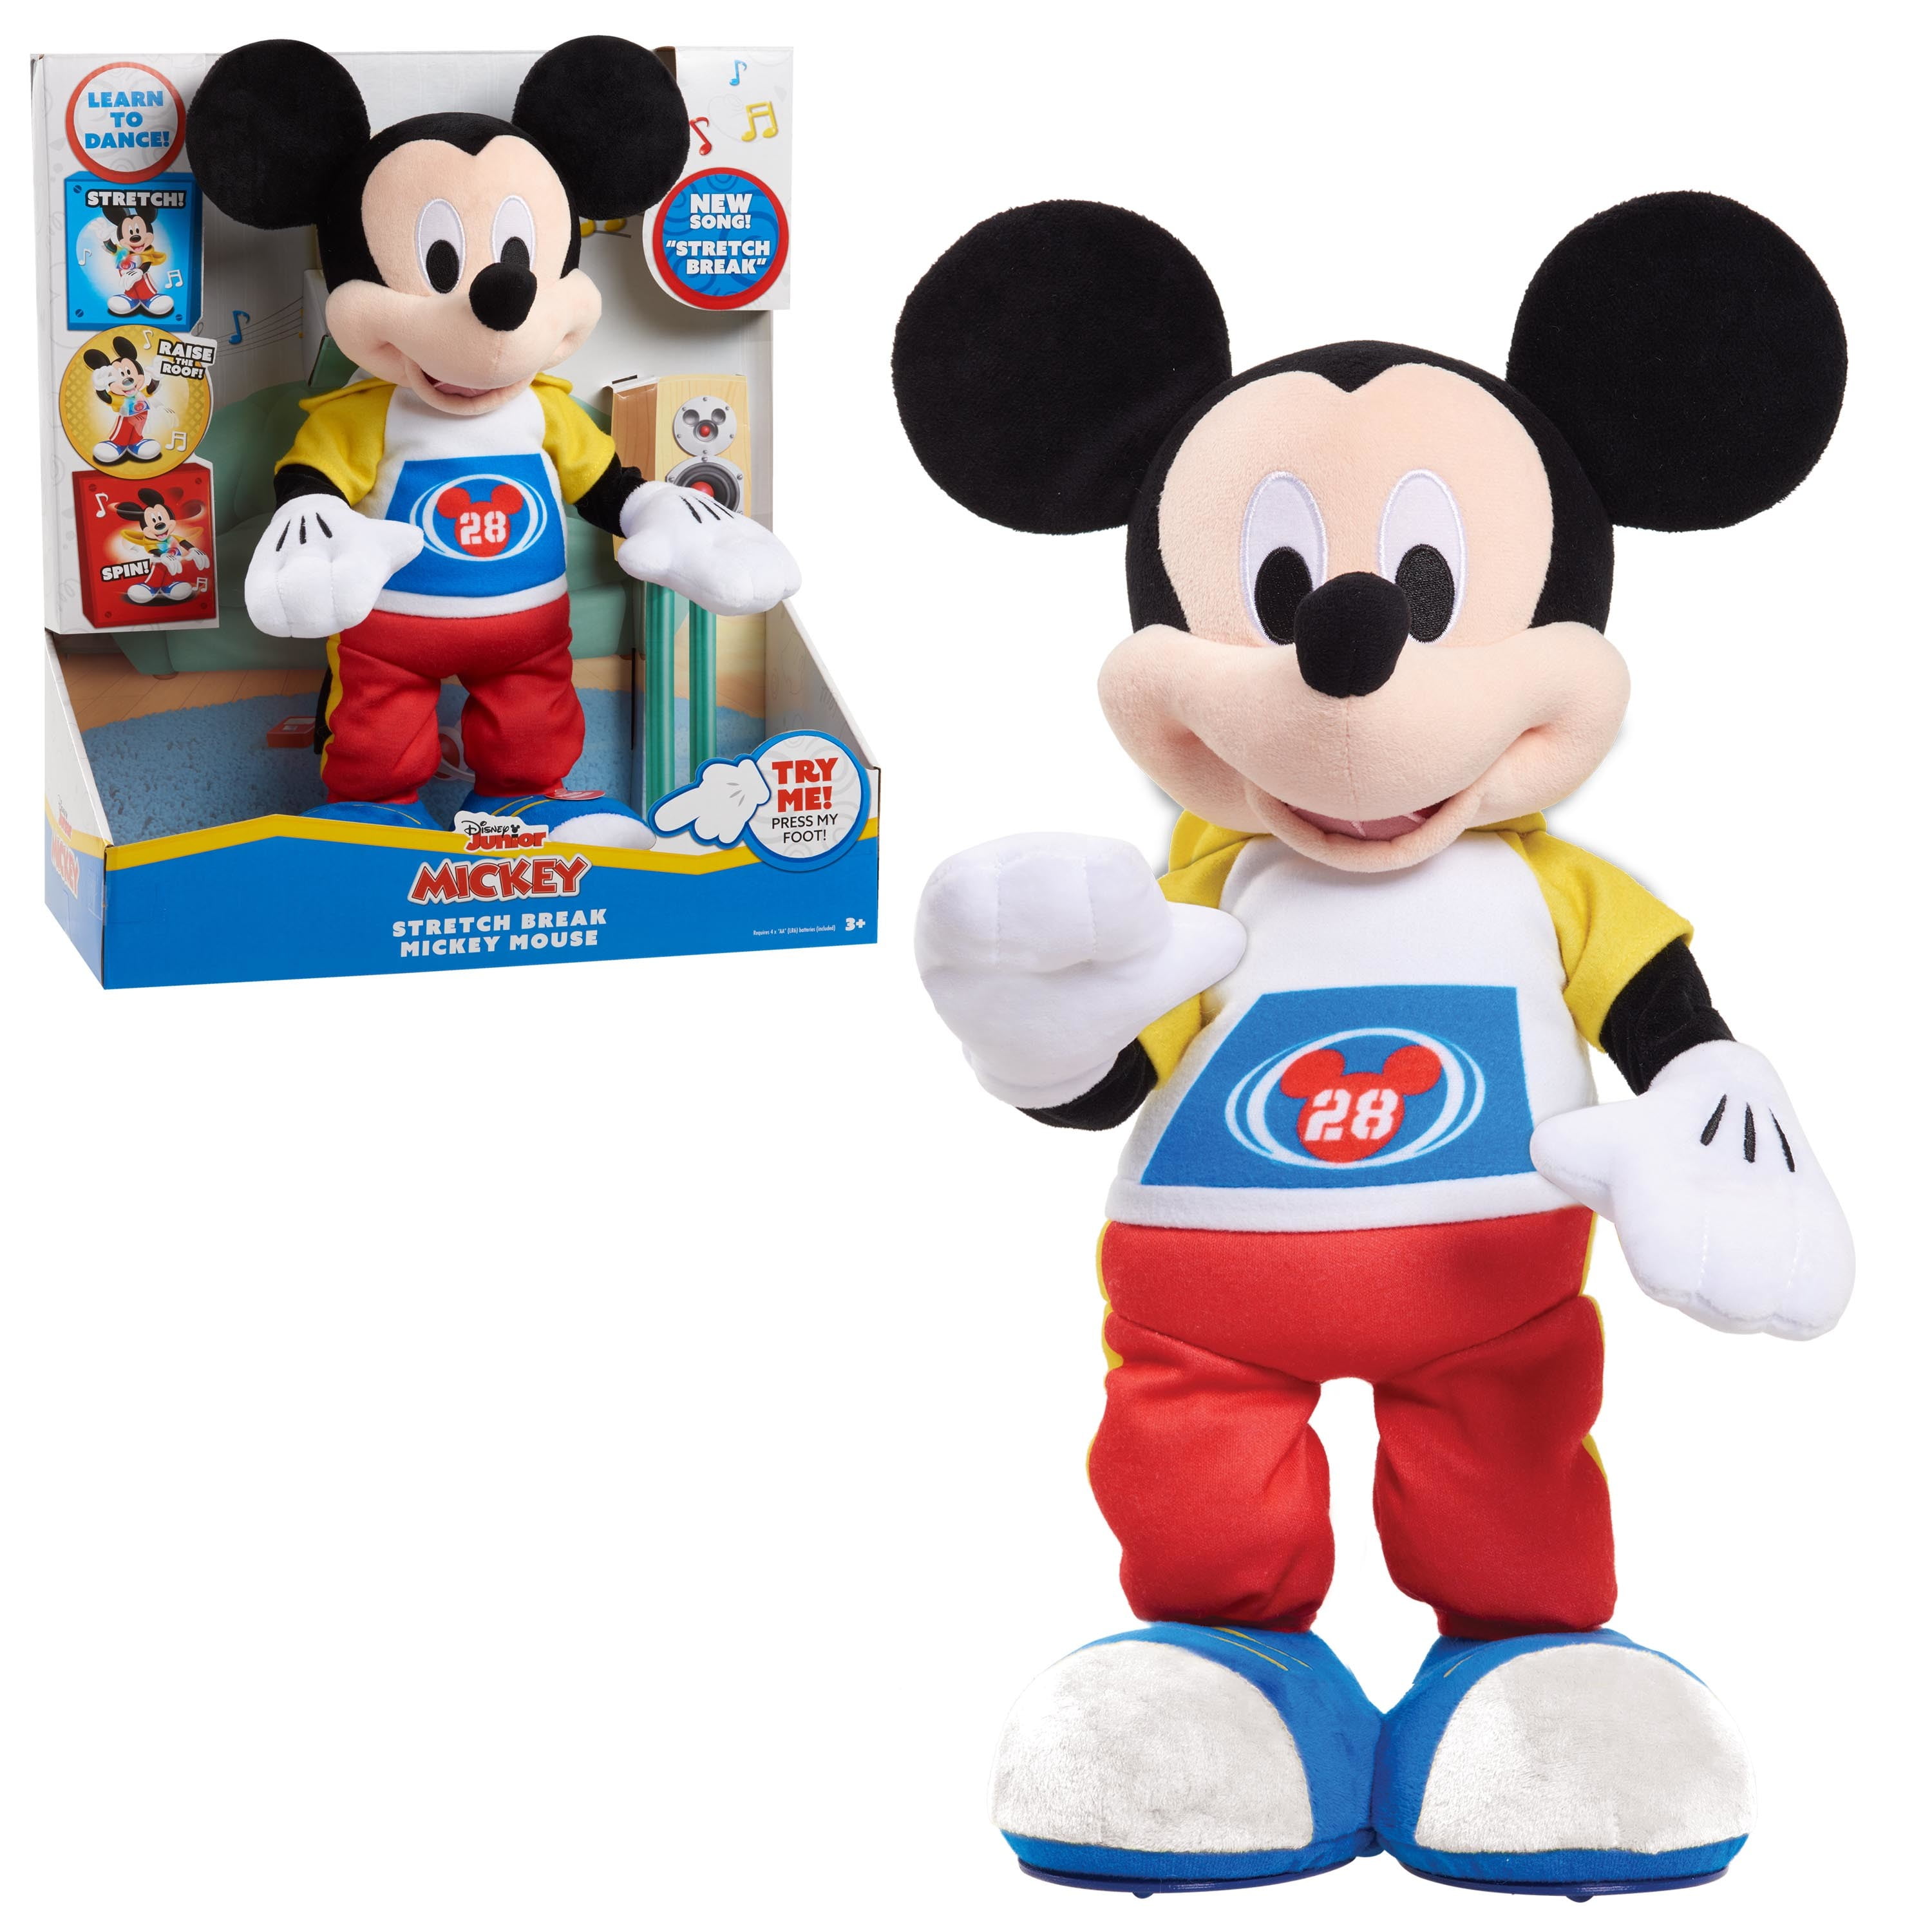 Disney Junior Mickey Mouse Funhouse Stretch Break Mickey Mouse 17 Inch  Dancing and Singing Feature Plush, Officially Licensed Kids Toys for Ages 3  Up, Gifts and Presents 